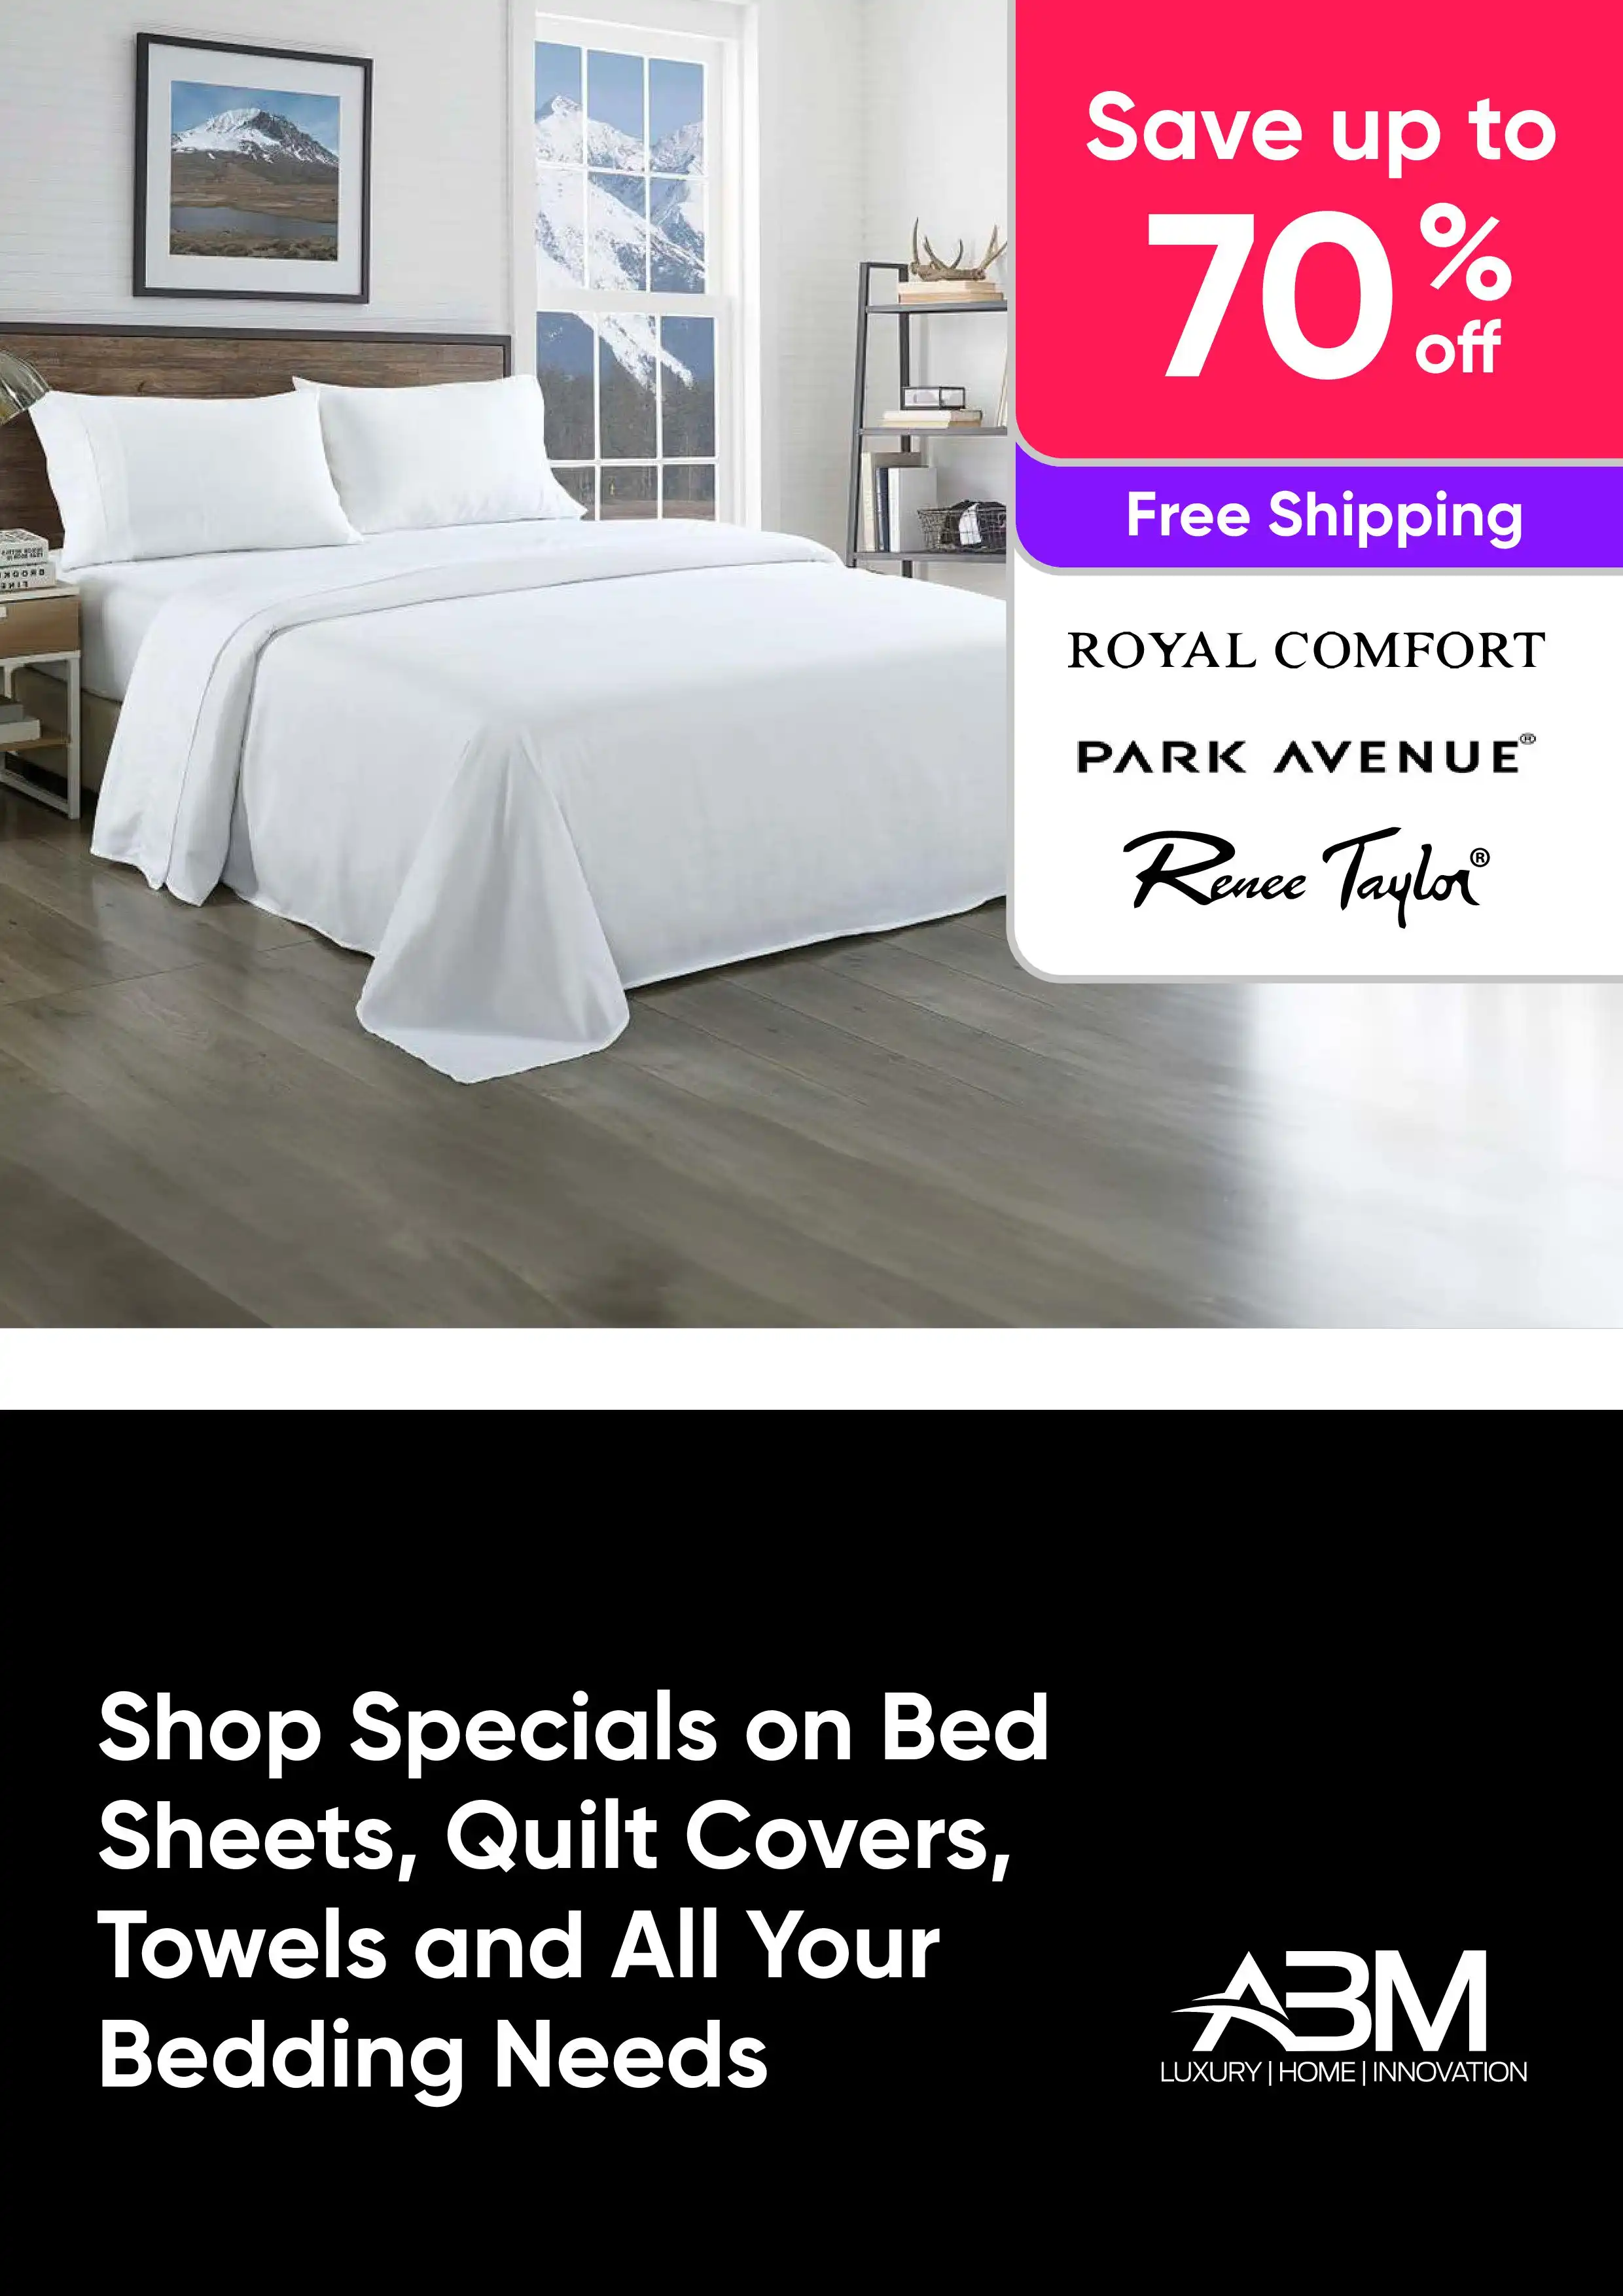 Bed and Bath Sale - Shop Specials on Bed Sheets, Quilt Covers, Towels and All Your Bedding Needs